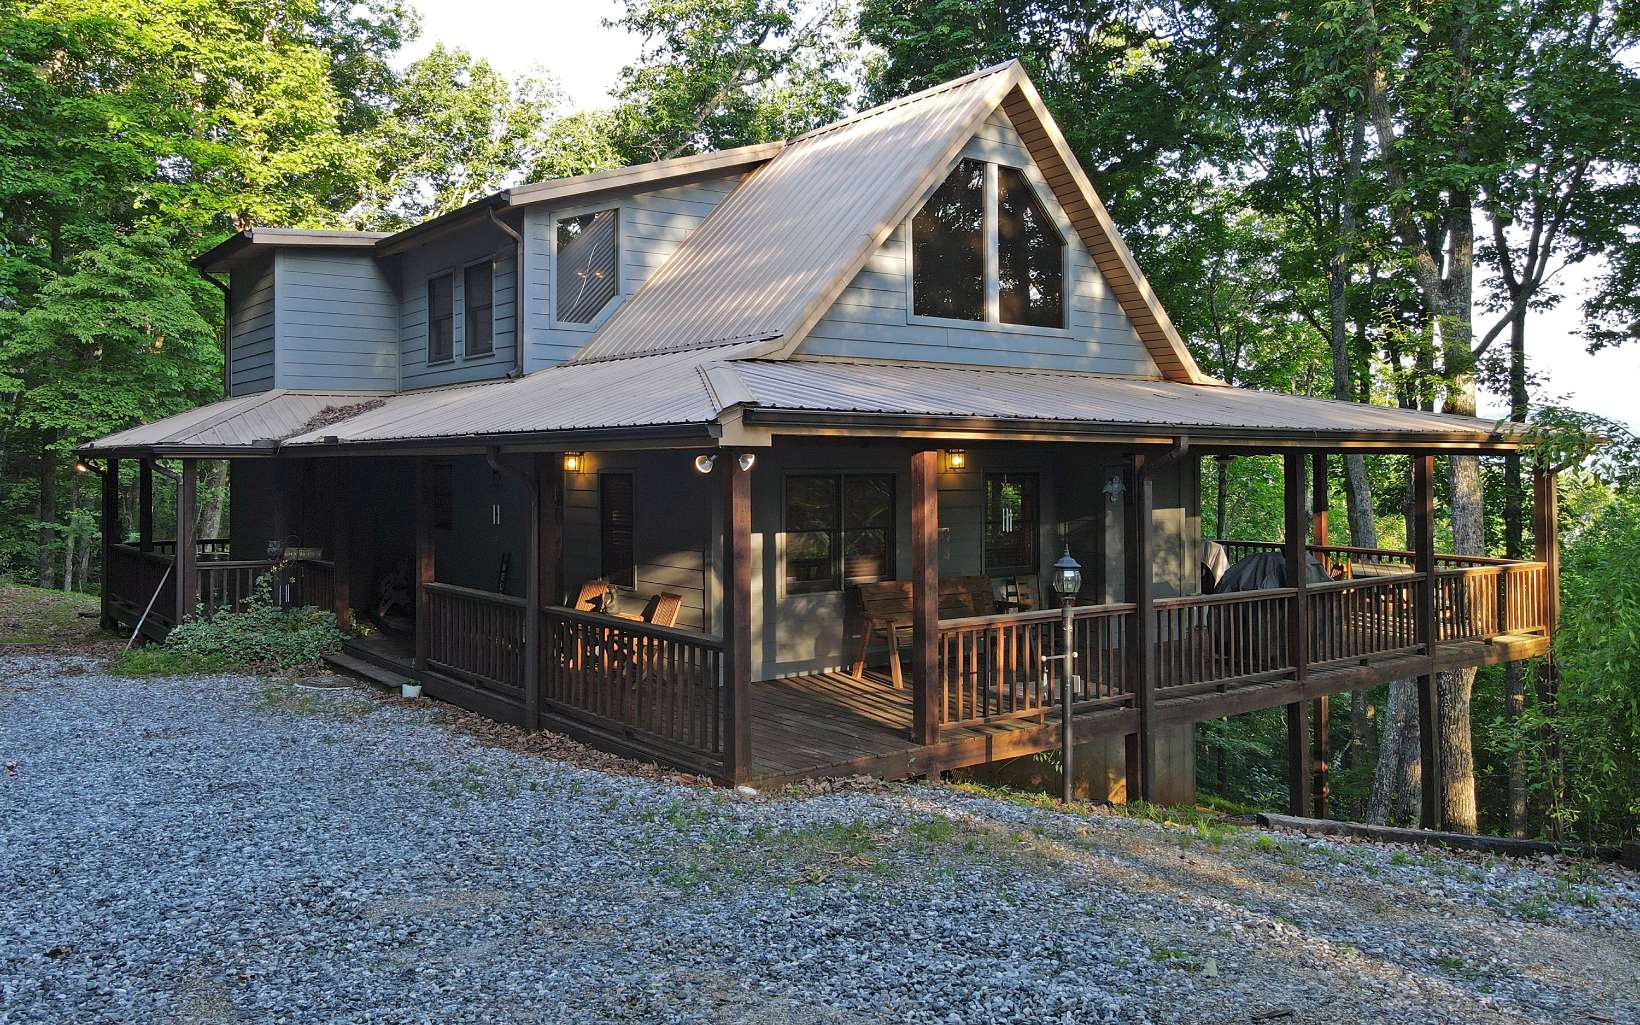 NORTH GA MOUNTAIN CABIN! ACTIVE RENTAL! This quality built 3 bedroom/3 bathroom cabin offers an open floor plan, a private setting, mountain views, a great room with vaulted ceilings, beautiful wood interior, two stacked stone fireplaces, stainless appliances, screened-in balcony off of the master bedroom, jetted tub & shower in the master bathroom, games/billiards room, tons of storage room, concrete patio on the lower level, low maintenance and wrap-around porch to enjoy the wonderful outdoors. Long-range mountain views that will get even better with a little trimming.